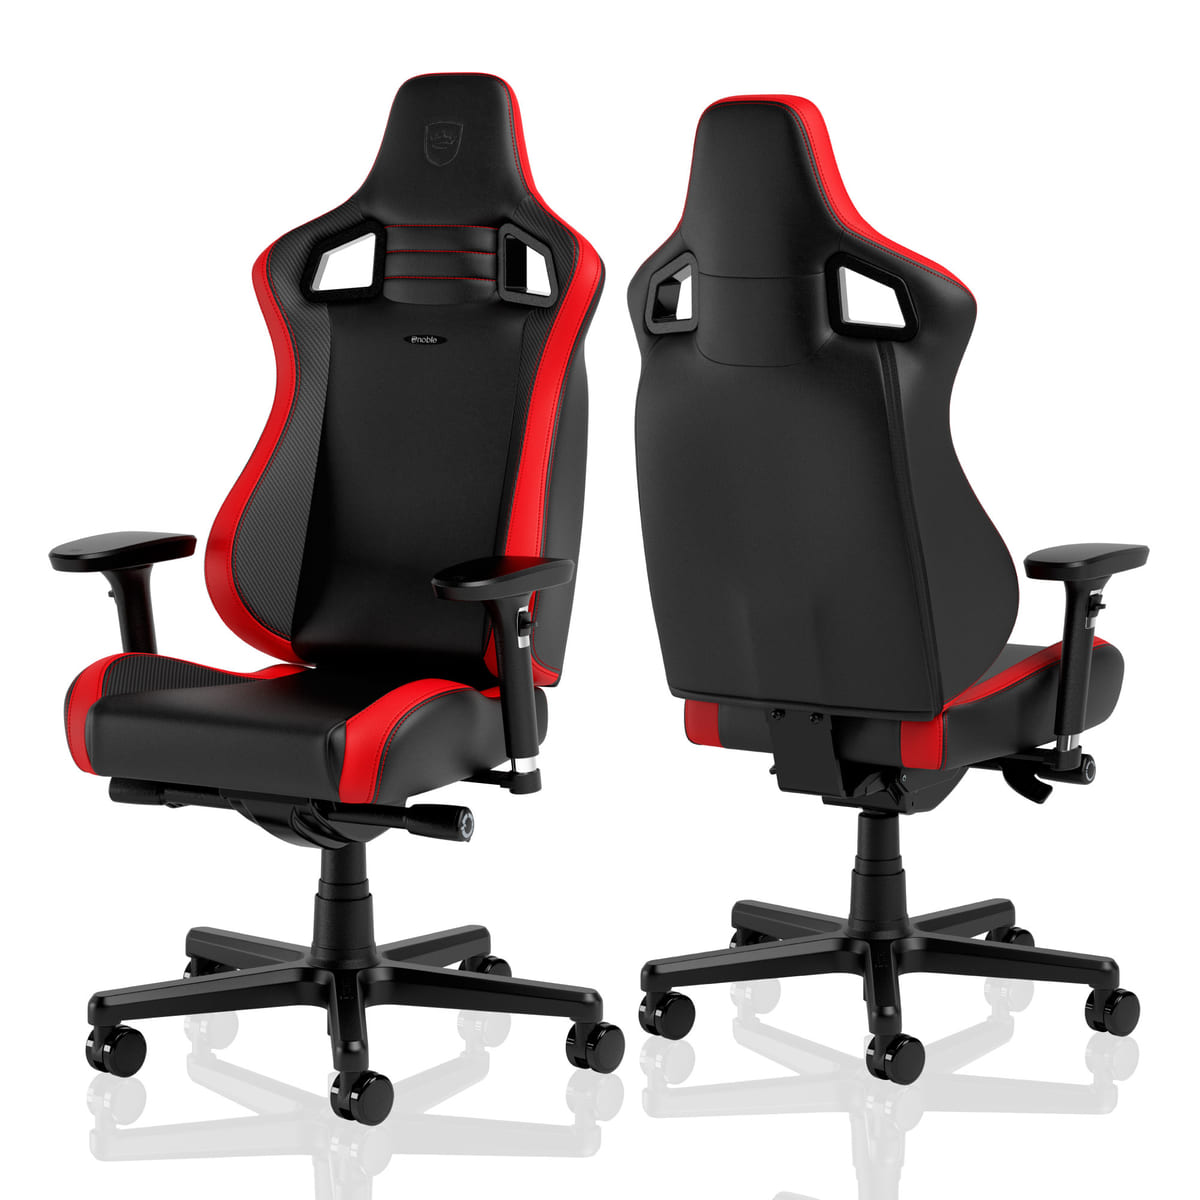 noblechairs(ノーブルチェアーズ)「EPIC COMPACT」３